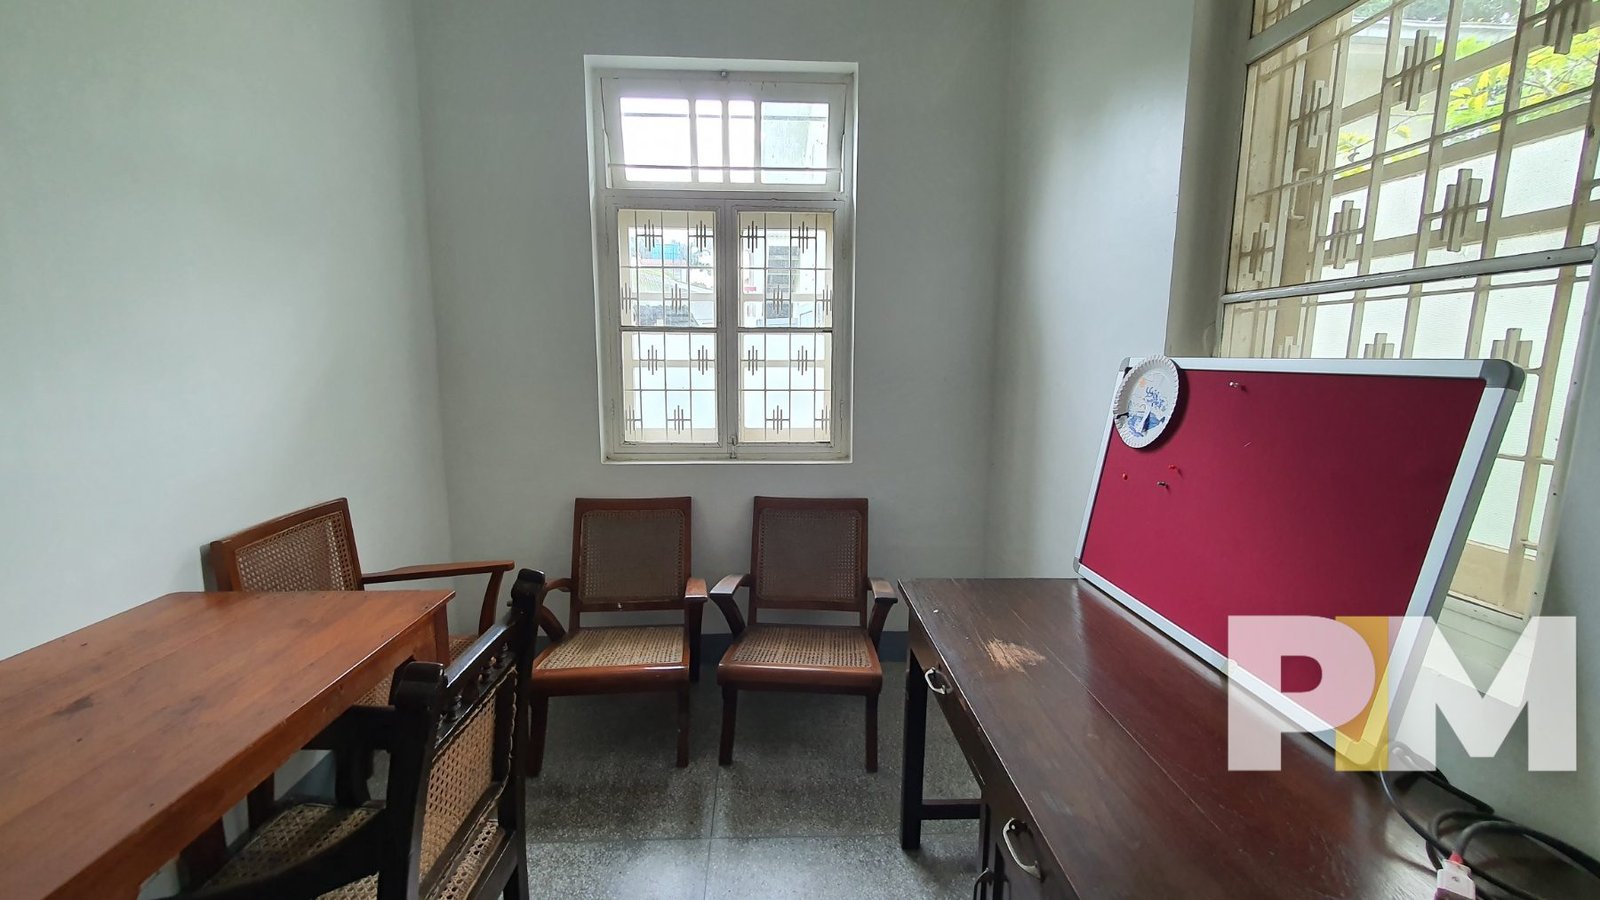 meeting room with table and chairs - Yangon Property